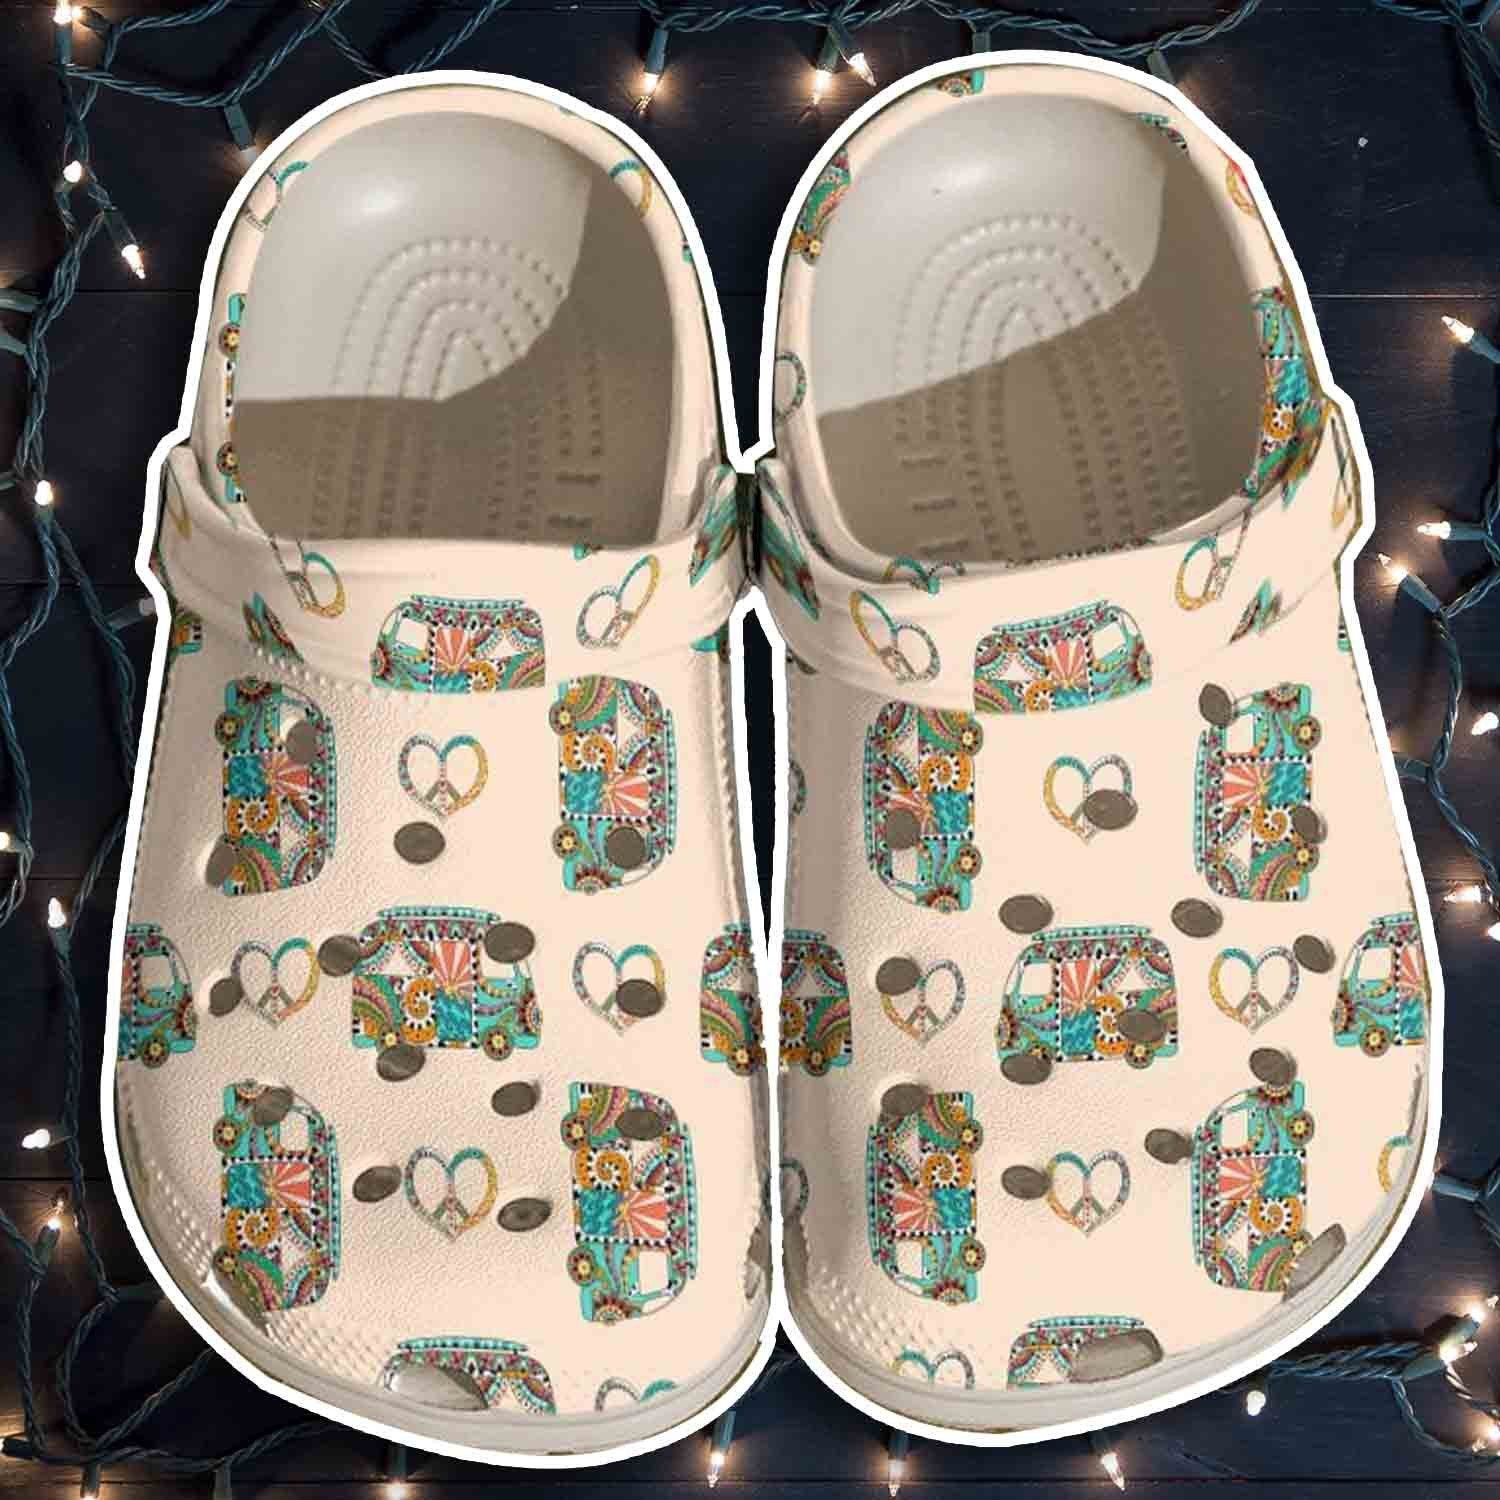 Funny Hippie Bus Peace Crocs Shoes Crocbland Clogs Gifts For Kids